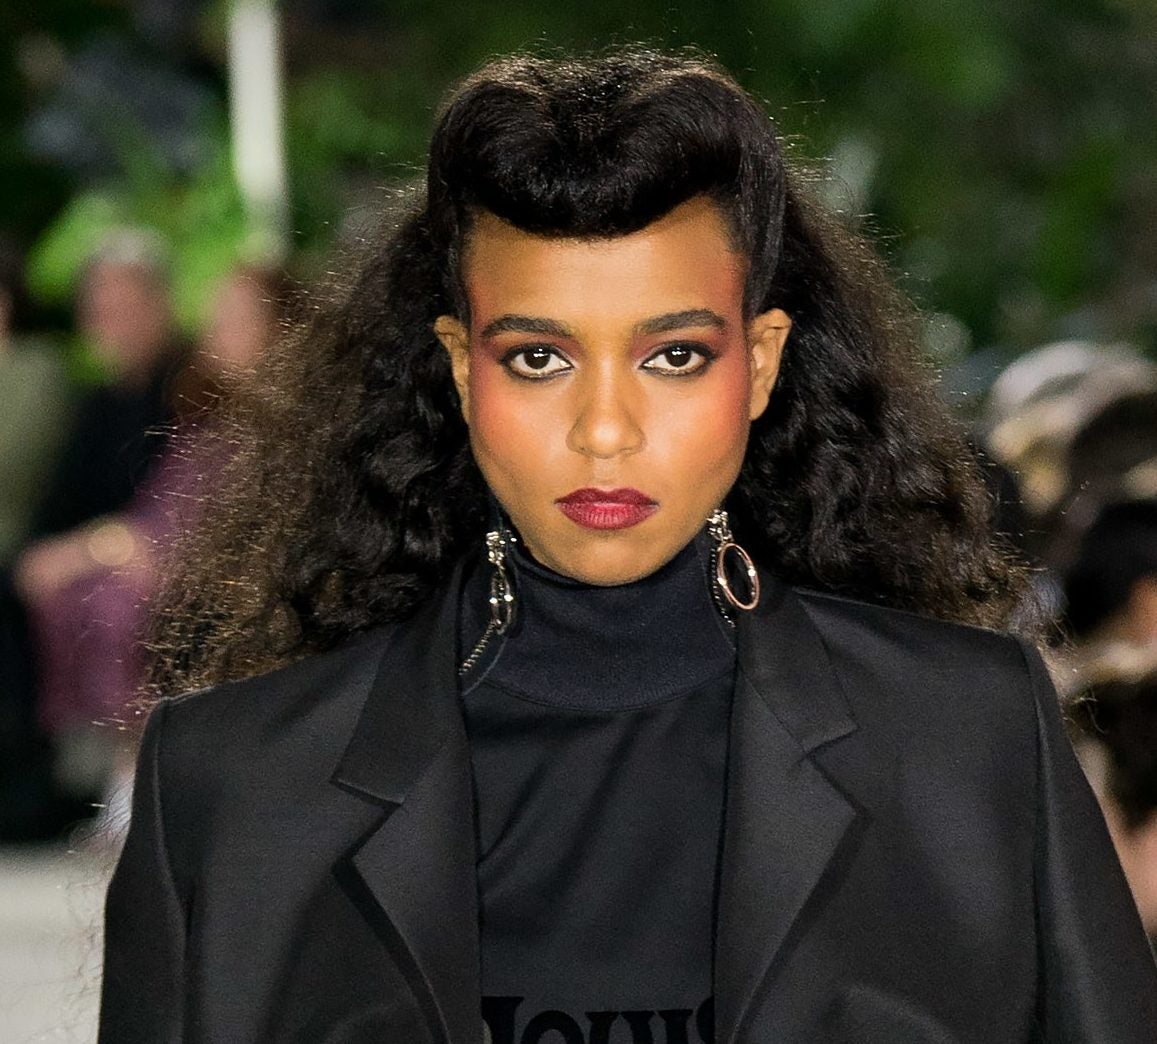 It's All About The 80s For Louis Vuitton's Resort 2020 Runway Beauty